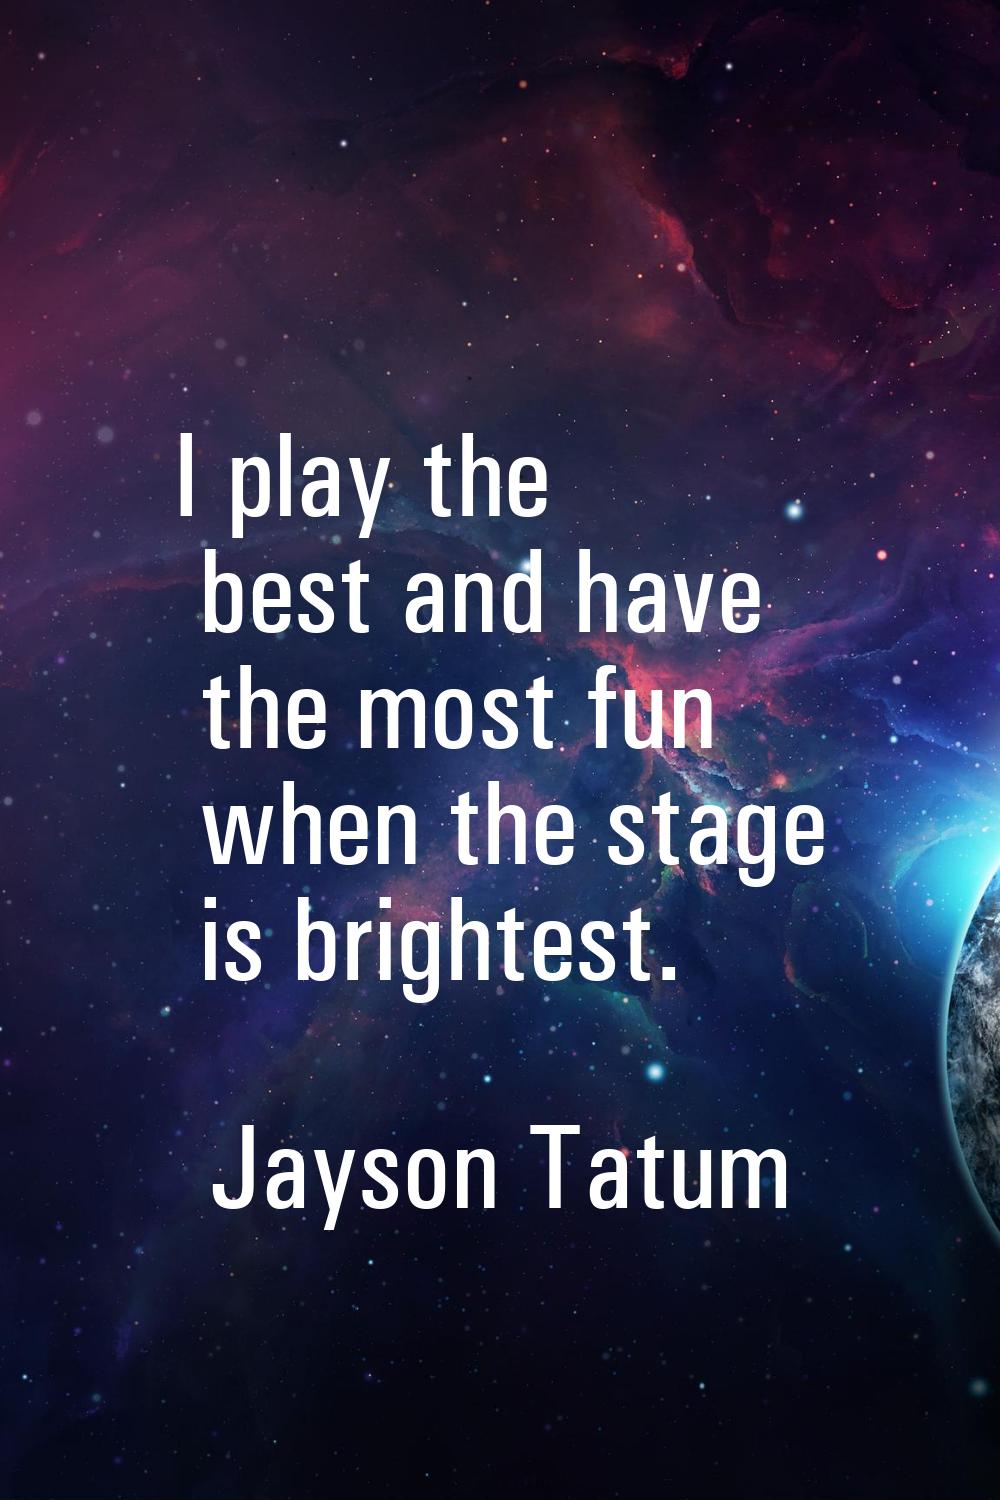 I play the best and have the most fun when the stage is brightest.